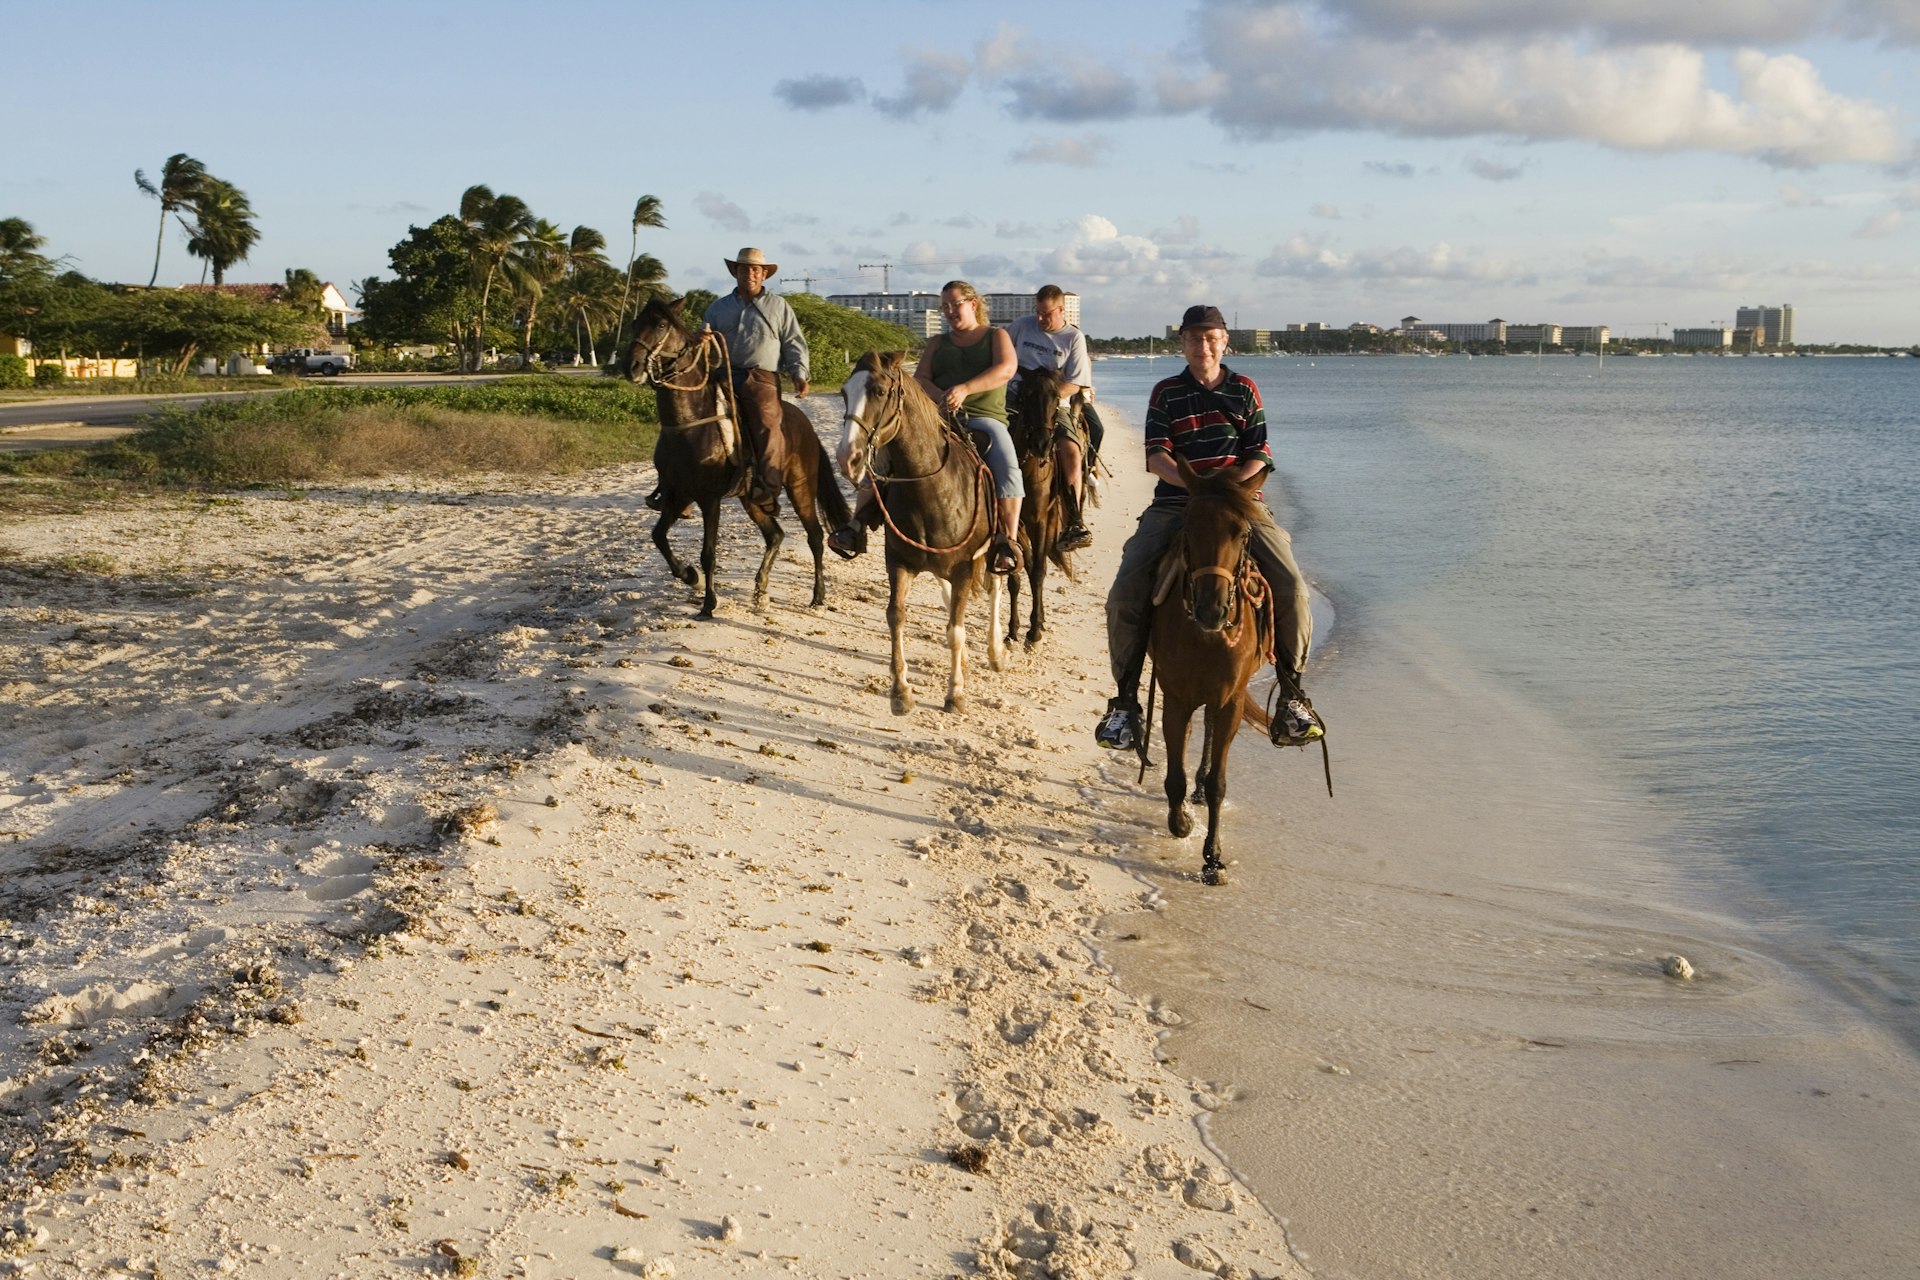 People riding horses on the beach in Aruba 